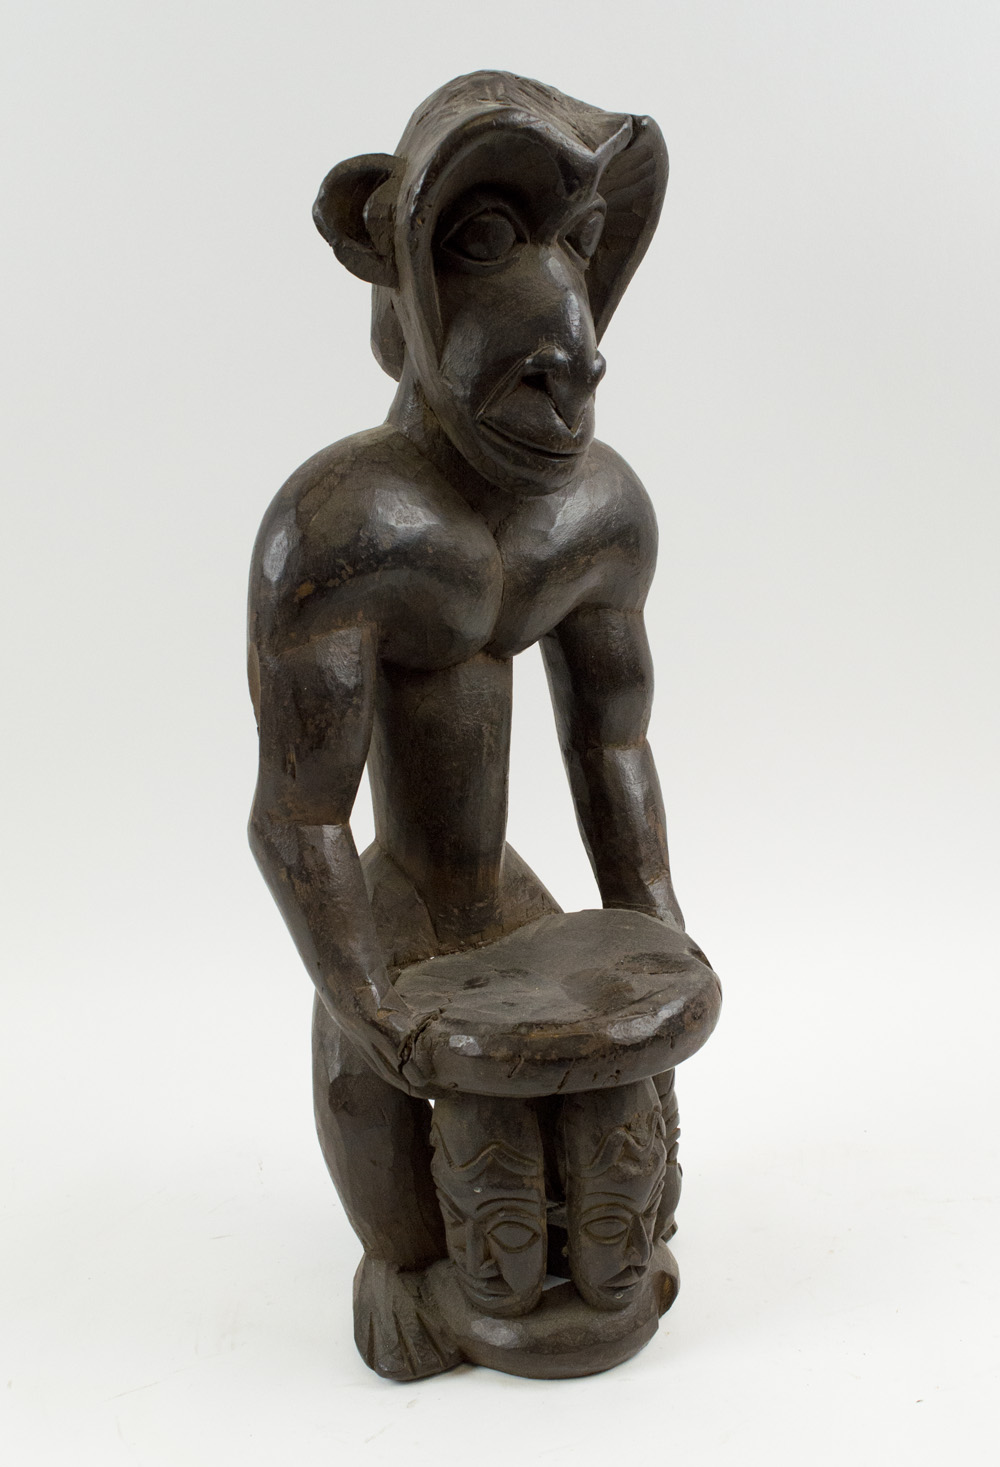 MONKEY FIGURAL CARVING, West African wood, depicting a monkey holding a stool in offetory pose,